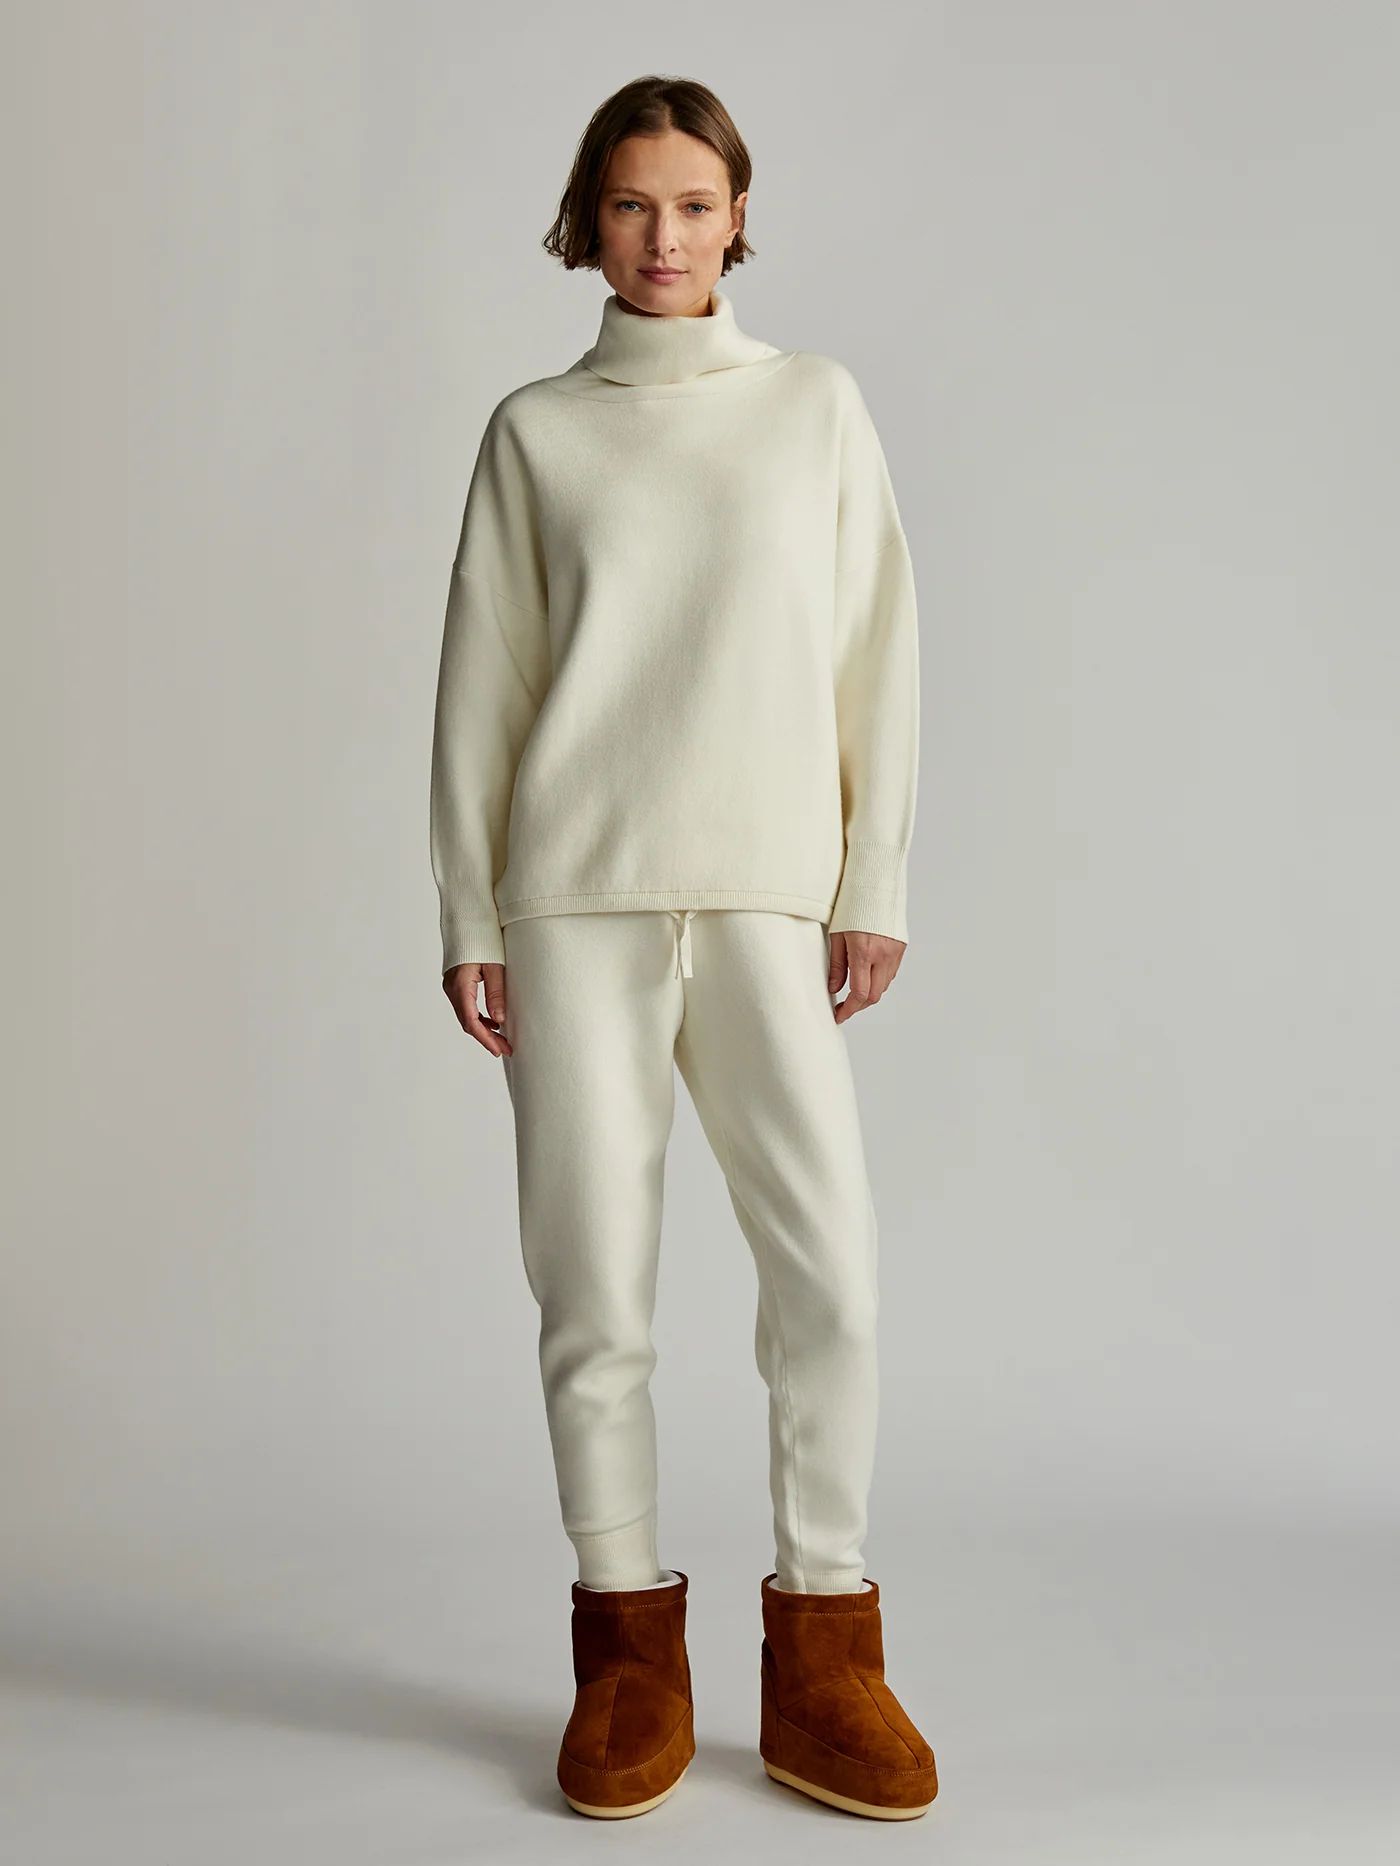 Cavendish Rollneck Knit3 ReviewsMeet your new-season essential: the Cavendish roll neck knit, a s... | Varley USA